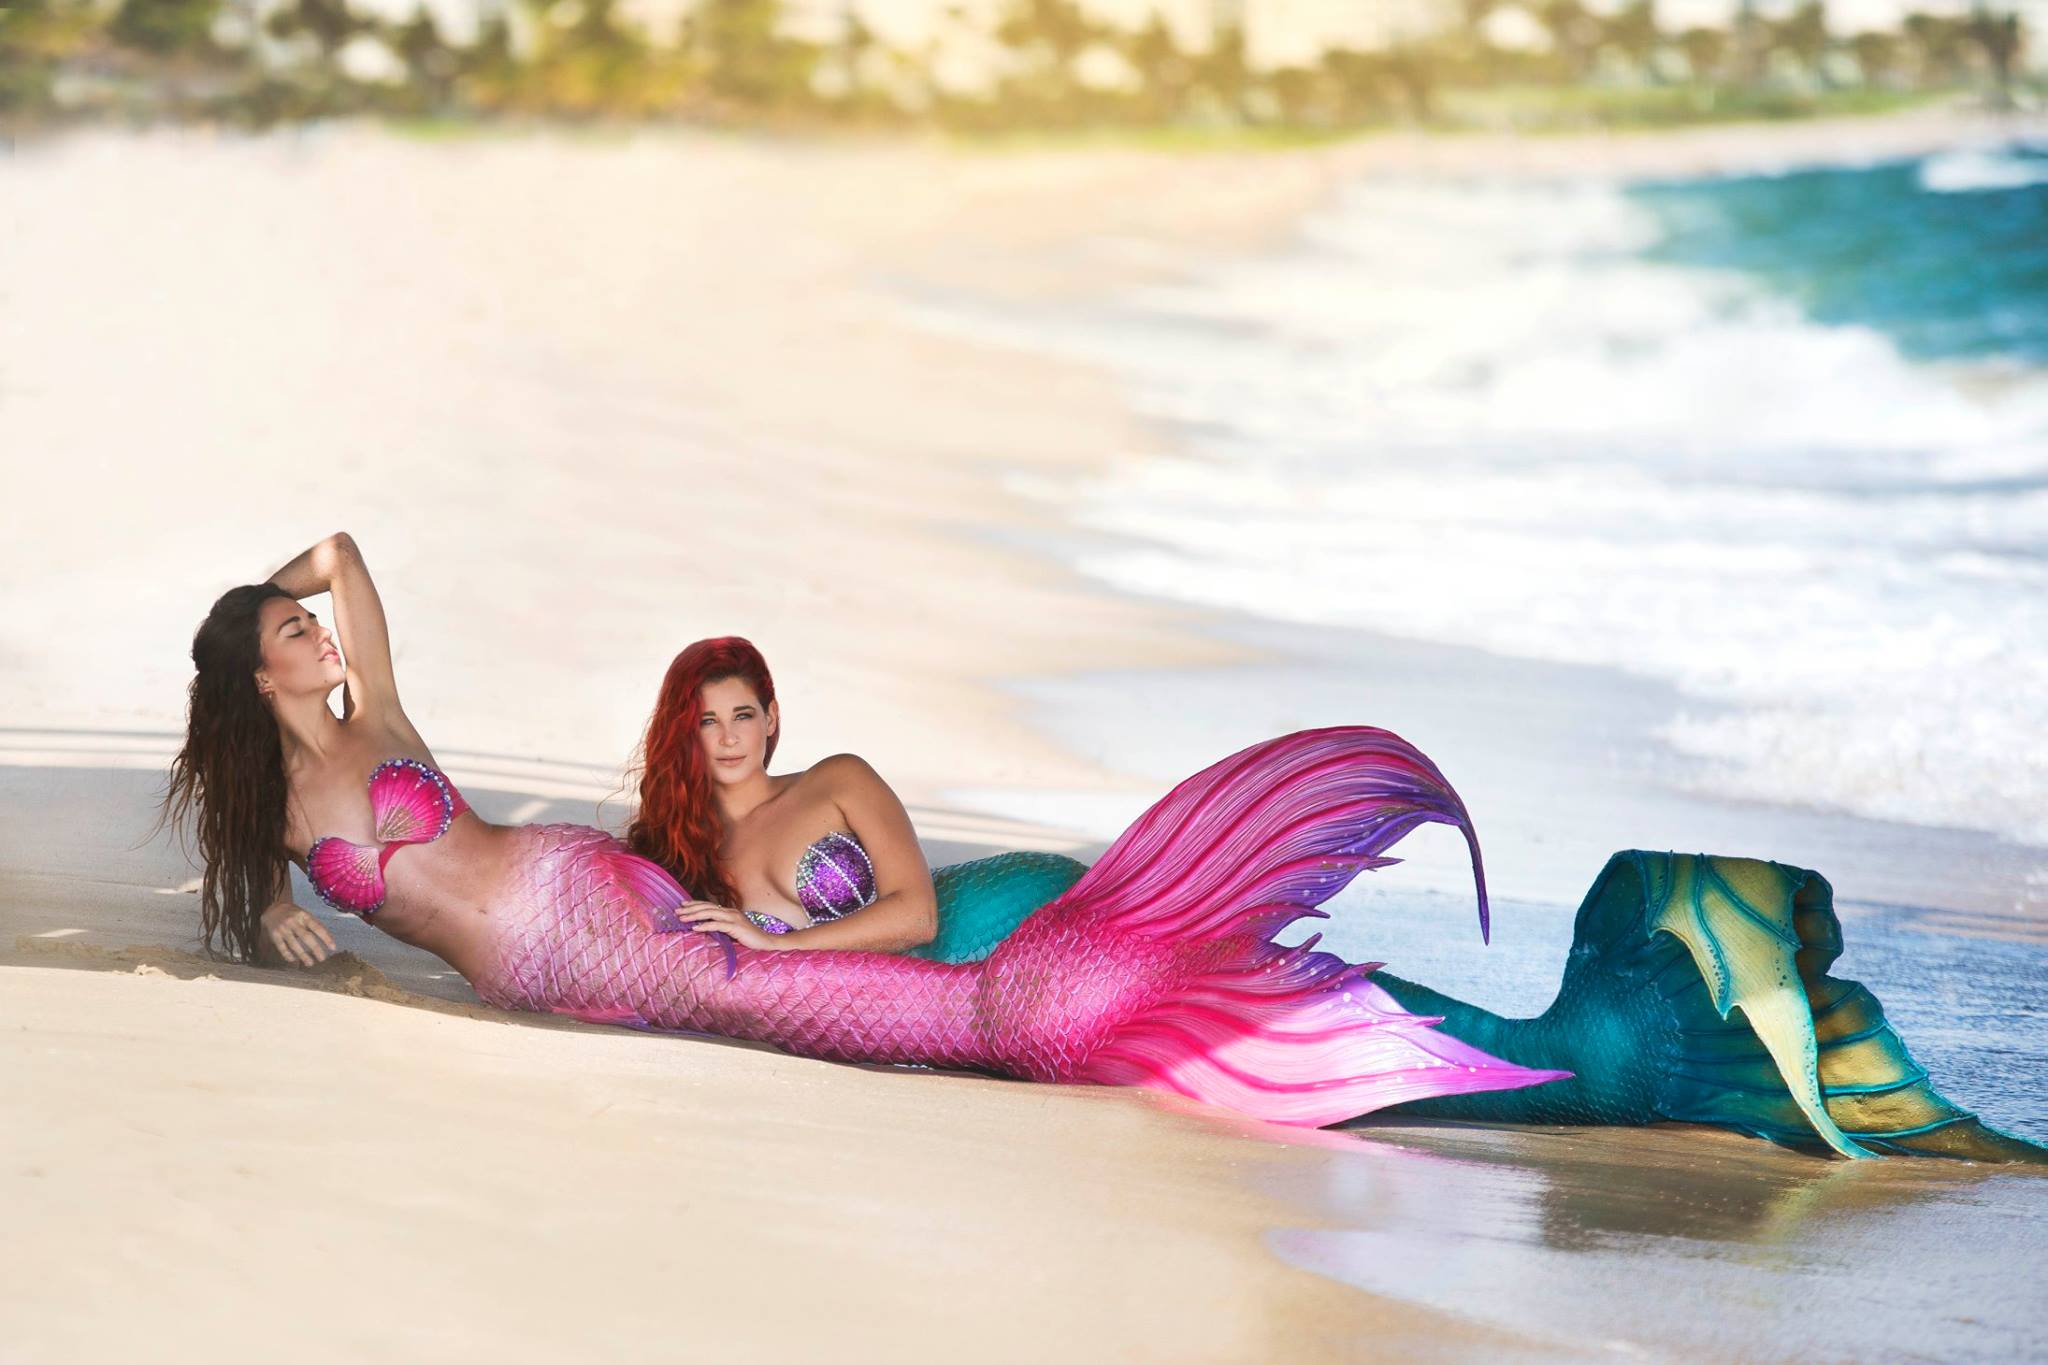 Modeling in mermaid tails with a friend on the beach!